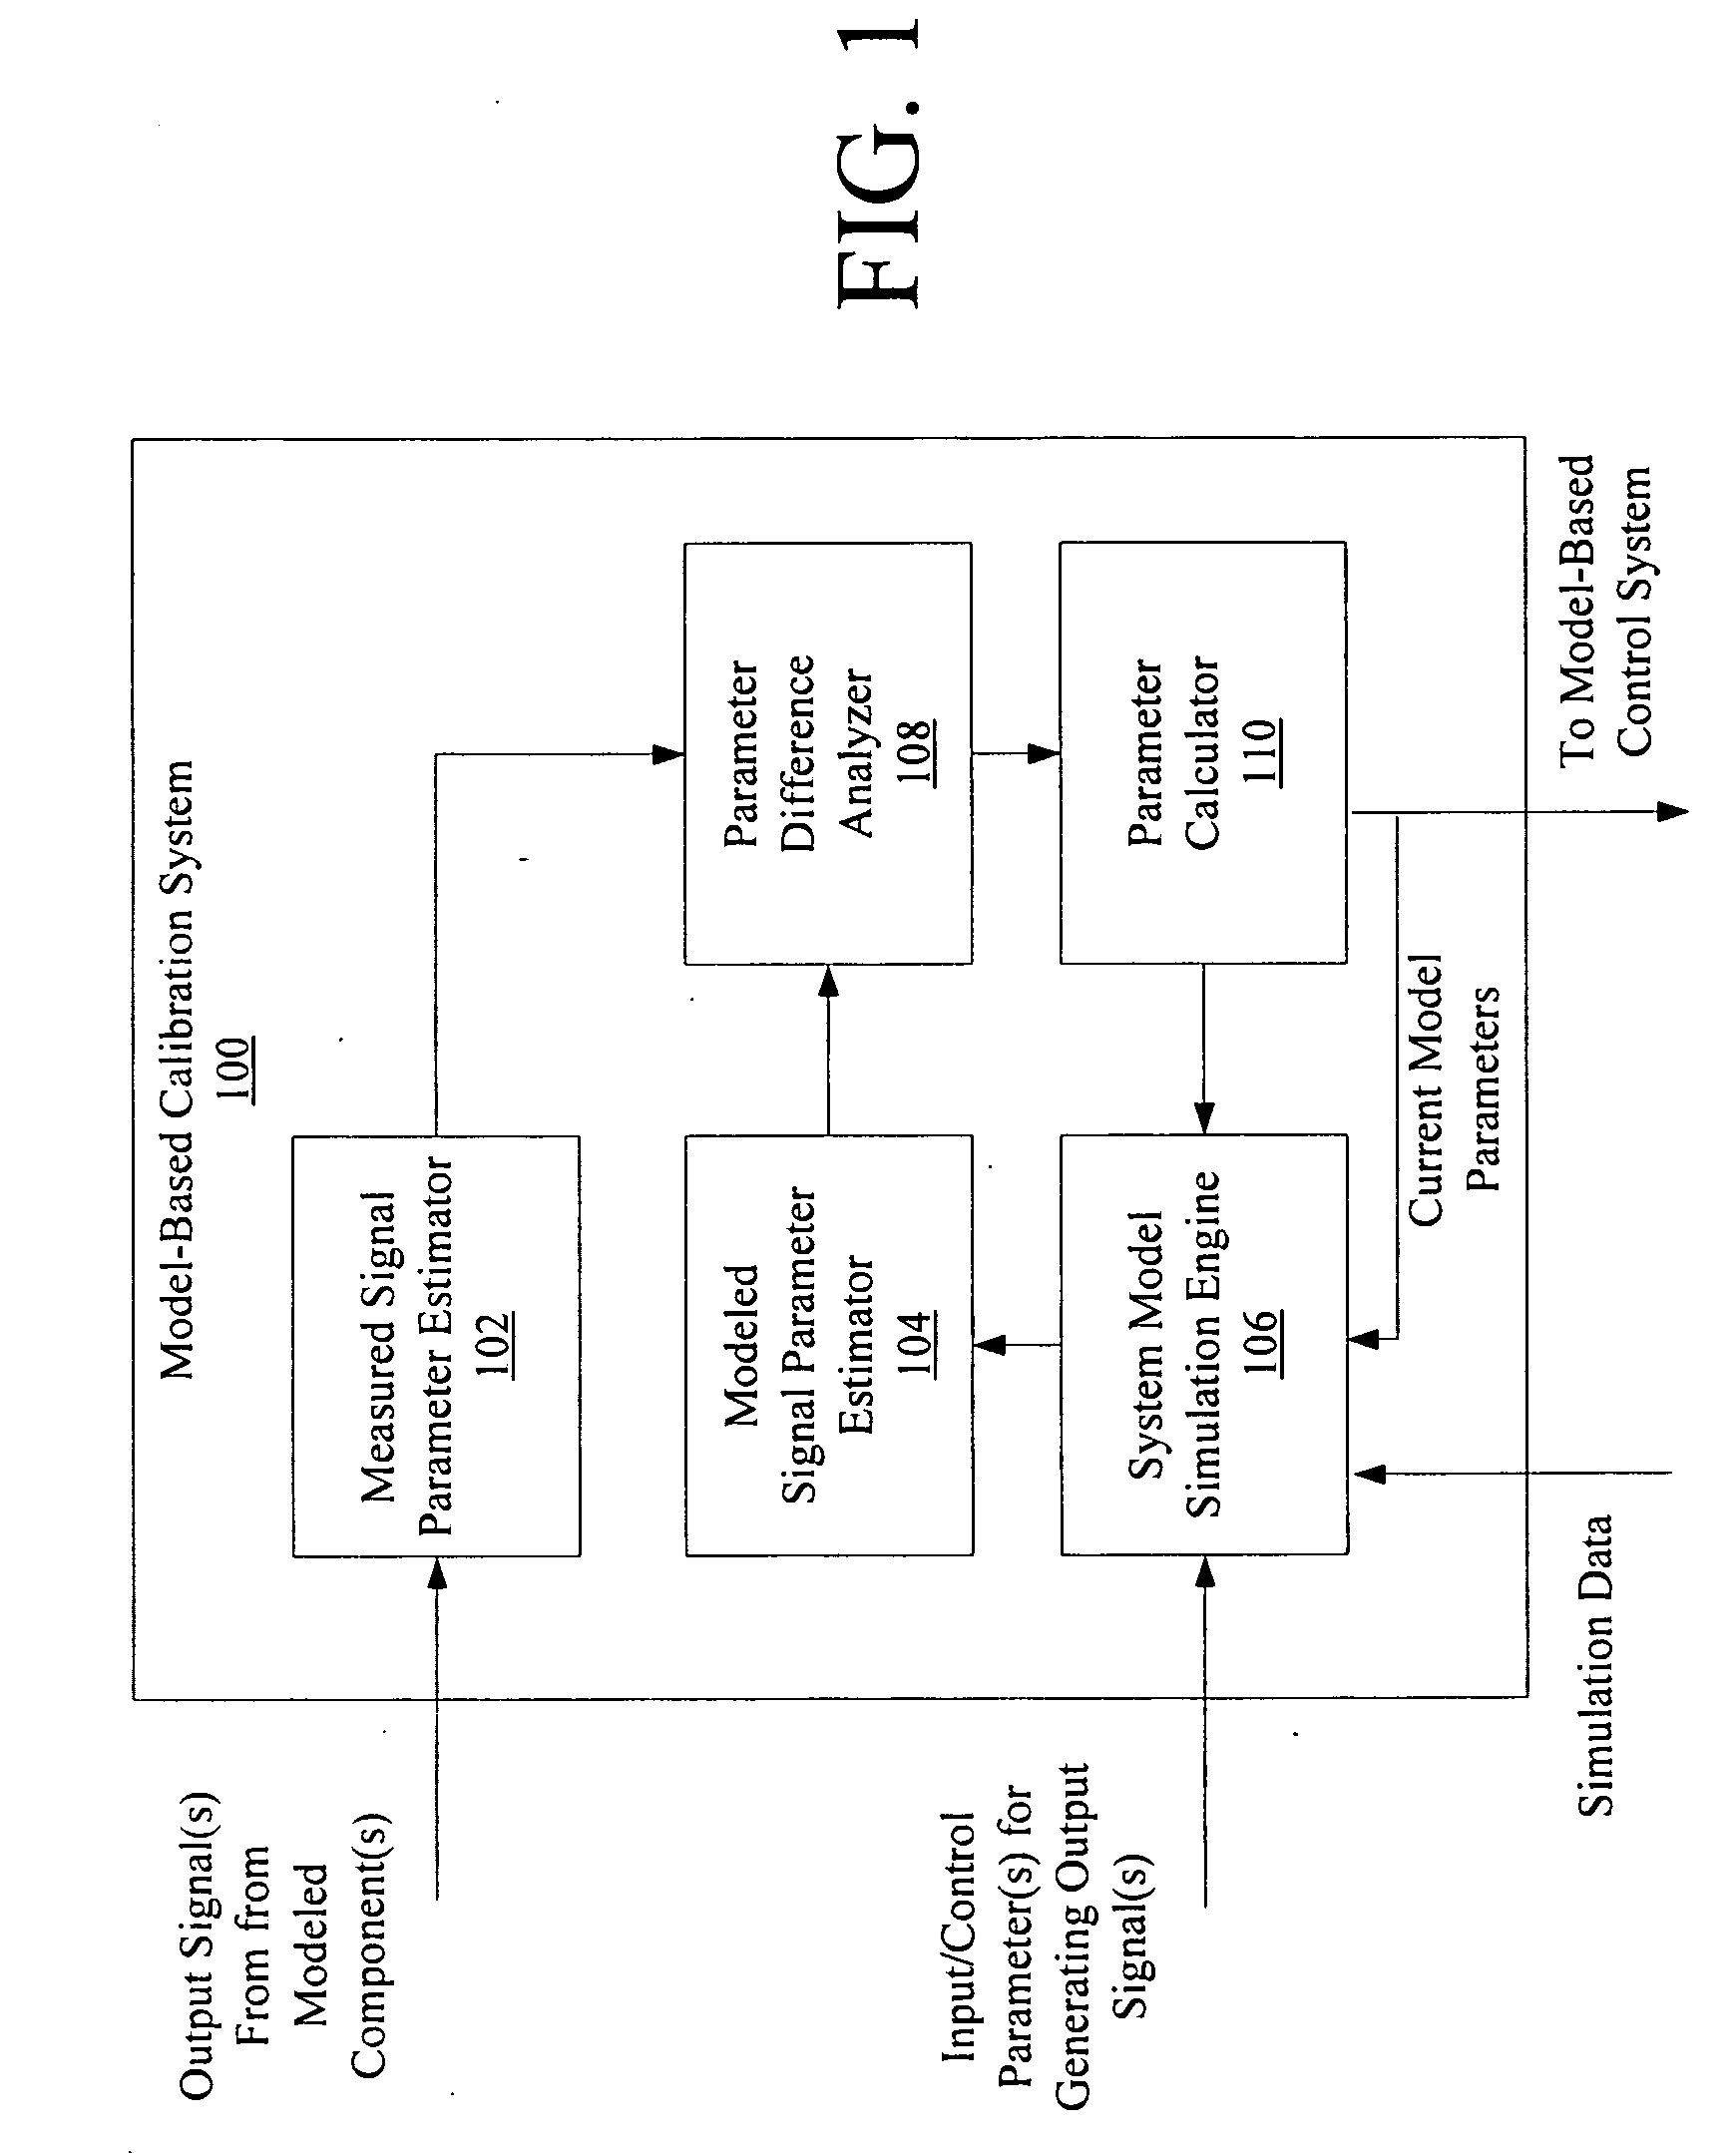 Model-based system calibration for control systems